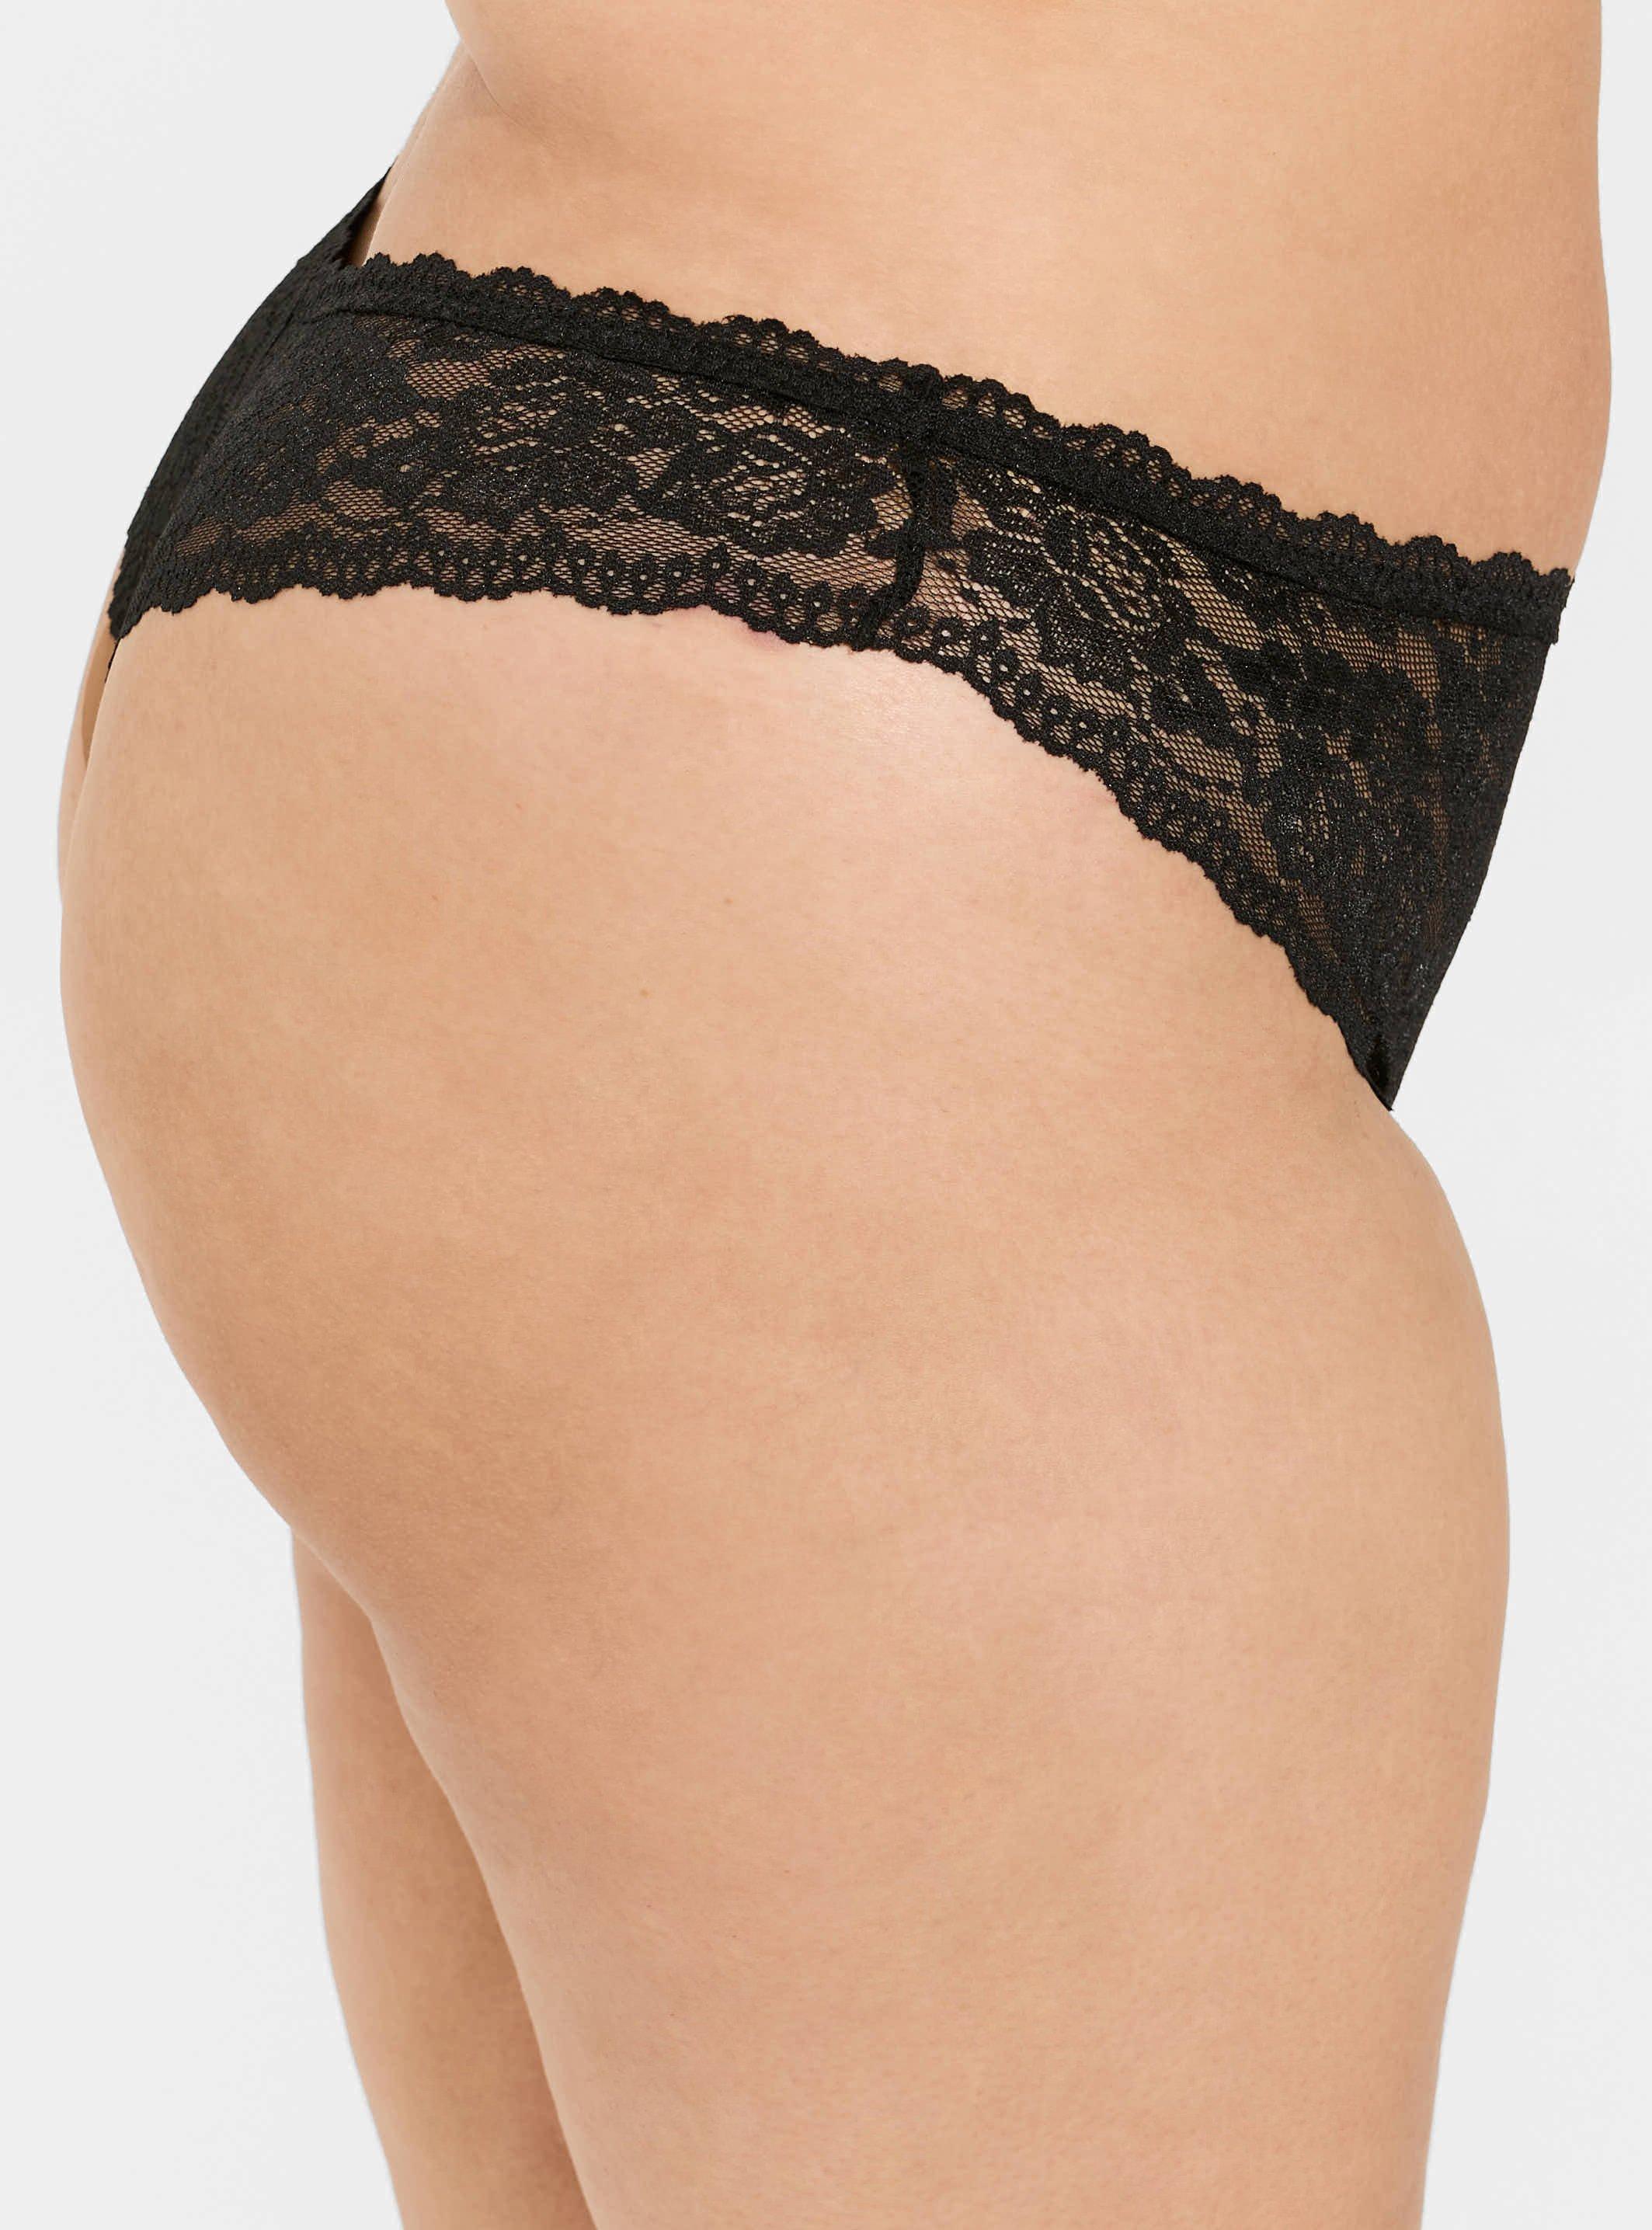 Almost Everyday Lace Thong Panty - Black